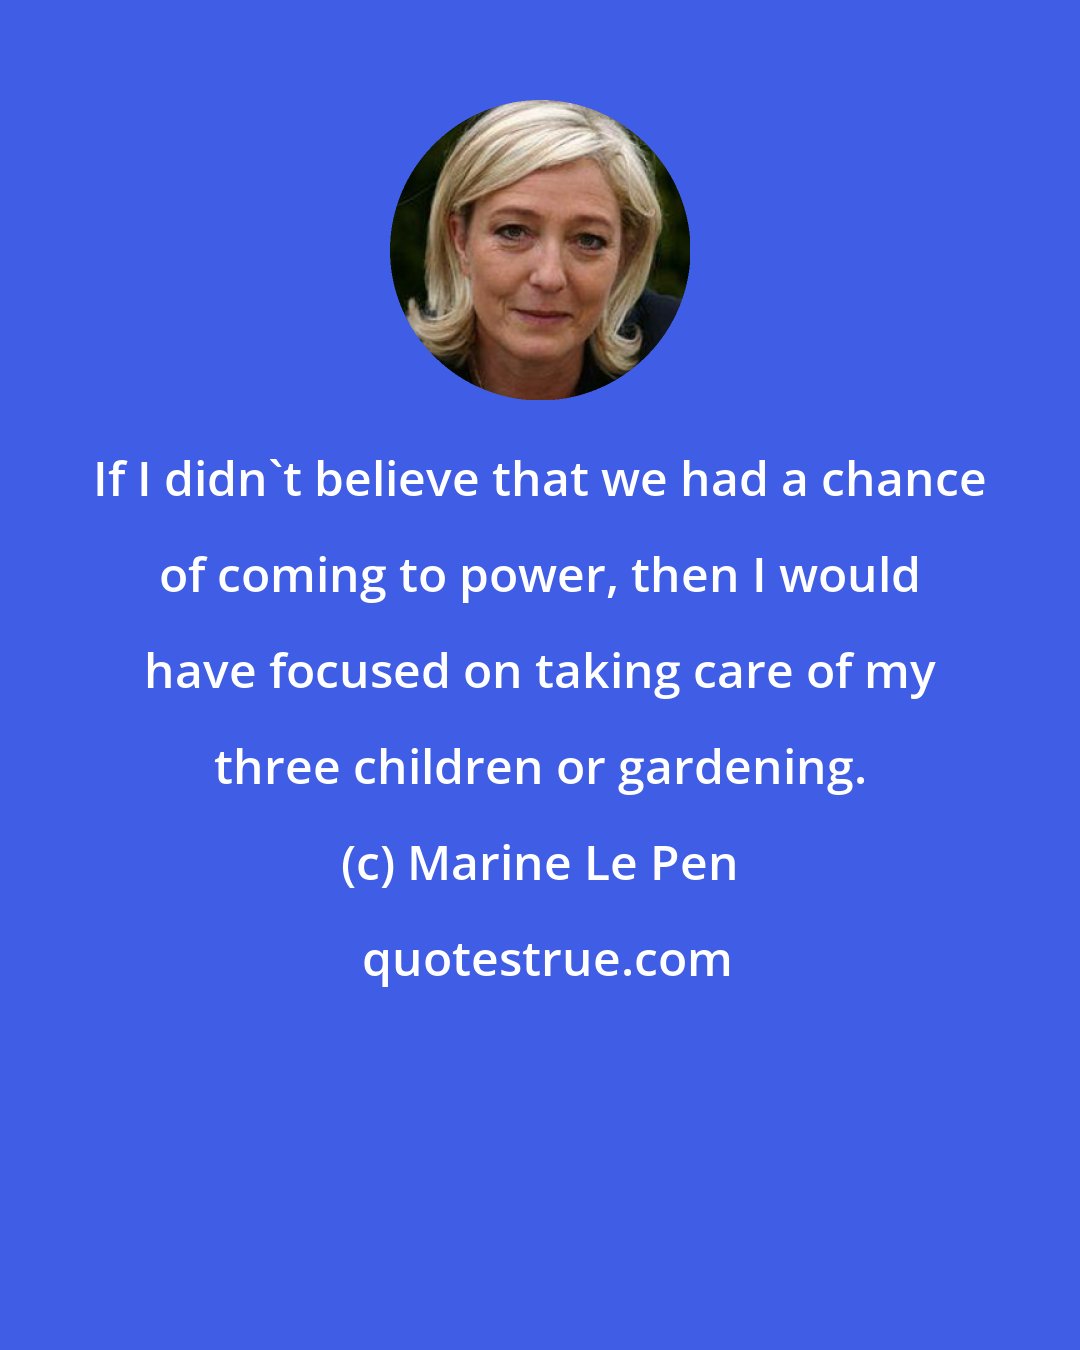 Marine Le Pen: If I didn't believe that we had a chance of coming to power, then I would have focused on taking care of my three children or gardening.